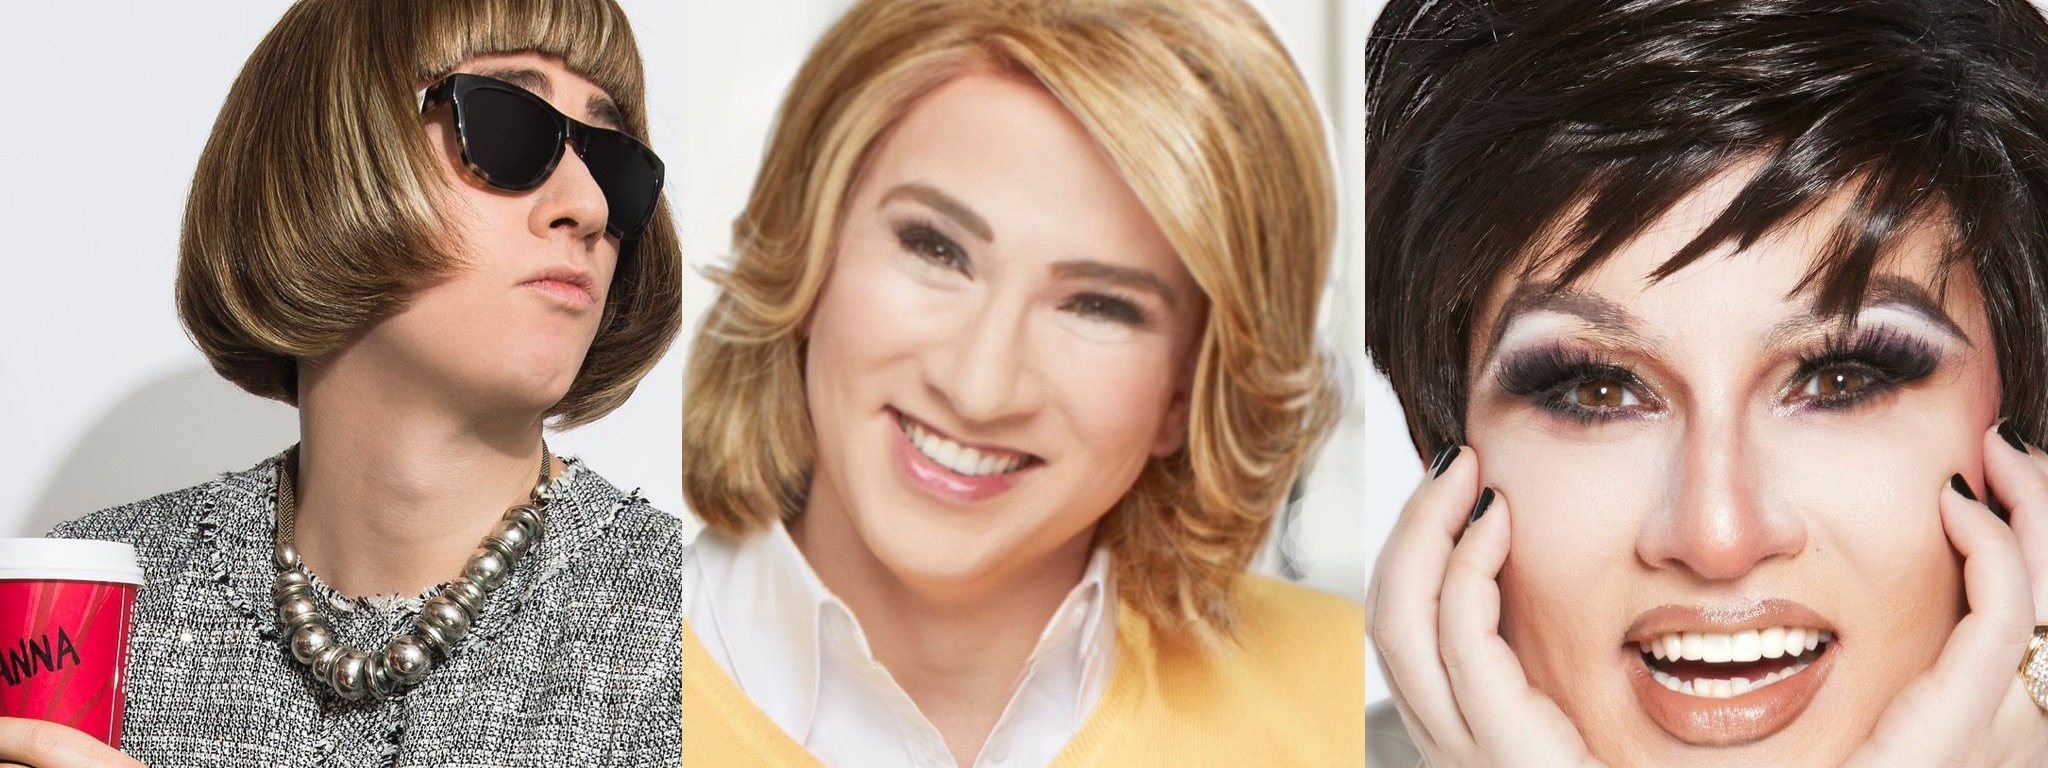 Ryan Raftery: The Titans of Media Trilogy (Tues Anna Wintour | Wed Martha Stewart | Thur Kris Jenner)